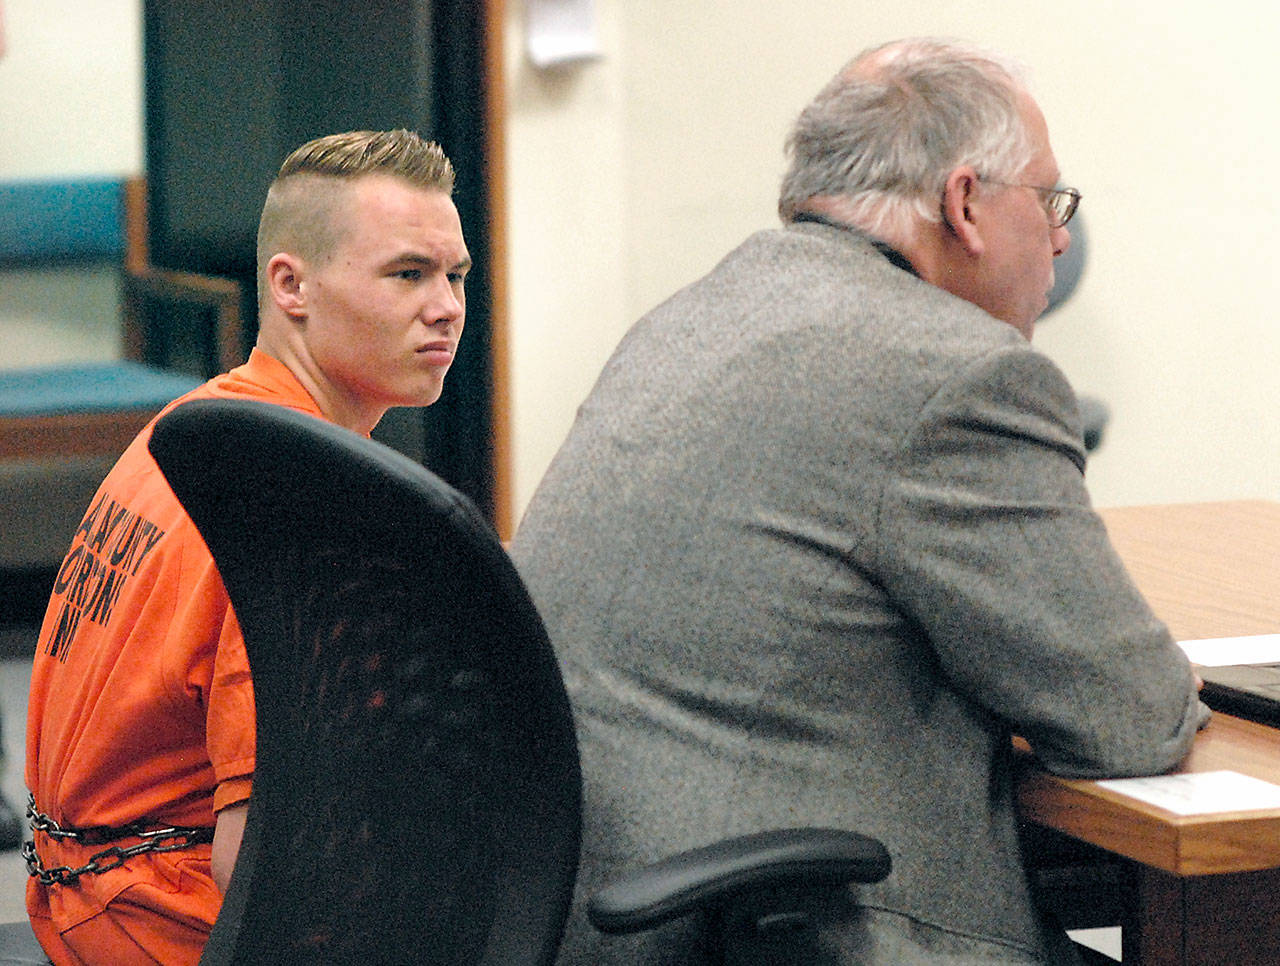 Benjamin Bonner looks at defense attorney Harry Gasnick during Bonner’s first appearance in Clallam County Superior Court on Friday on charges of second-degree murder, animal cruelty and theft of a motor vehicle. (Keith Thorpe/Peninsula Daily News)